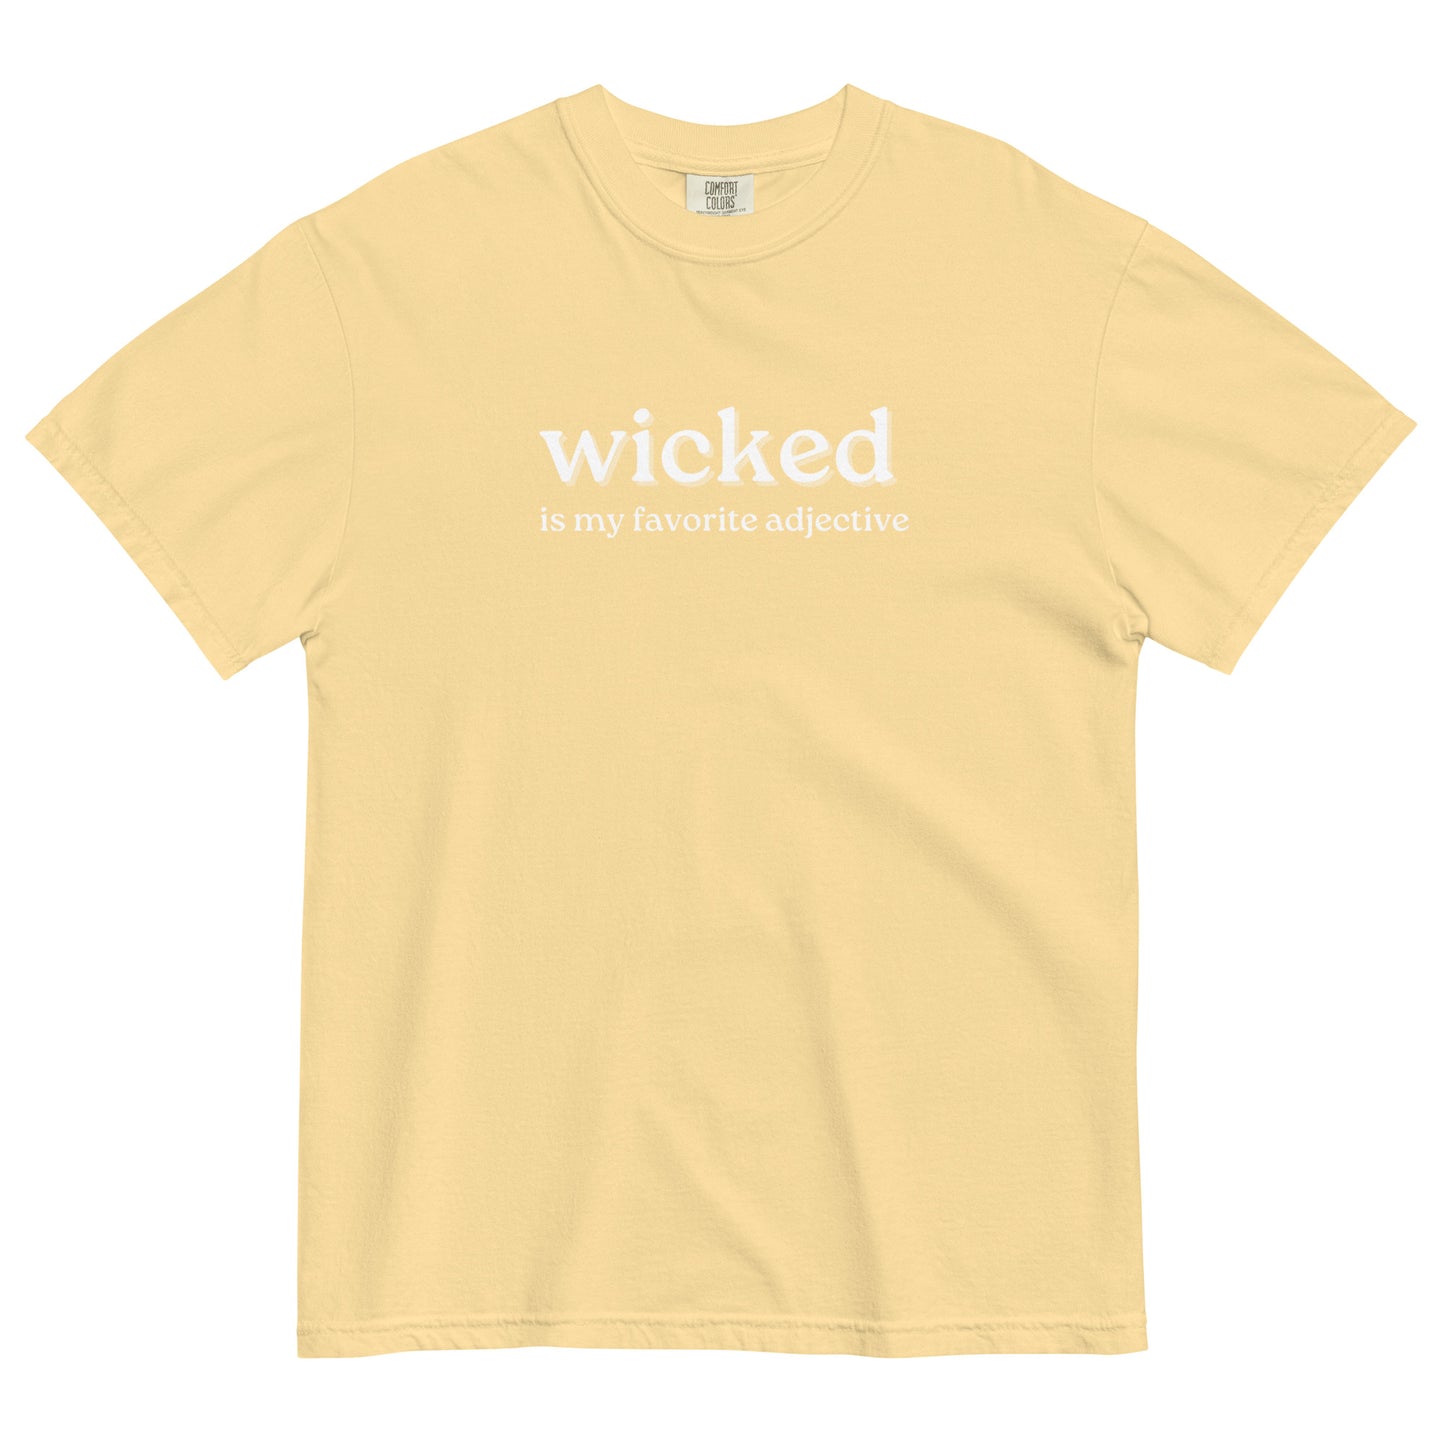 yellow tshirt that says "wicked is my favorite adjective" in white lettering